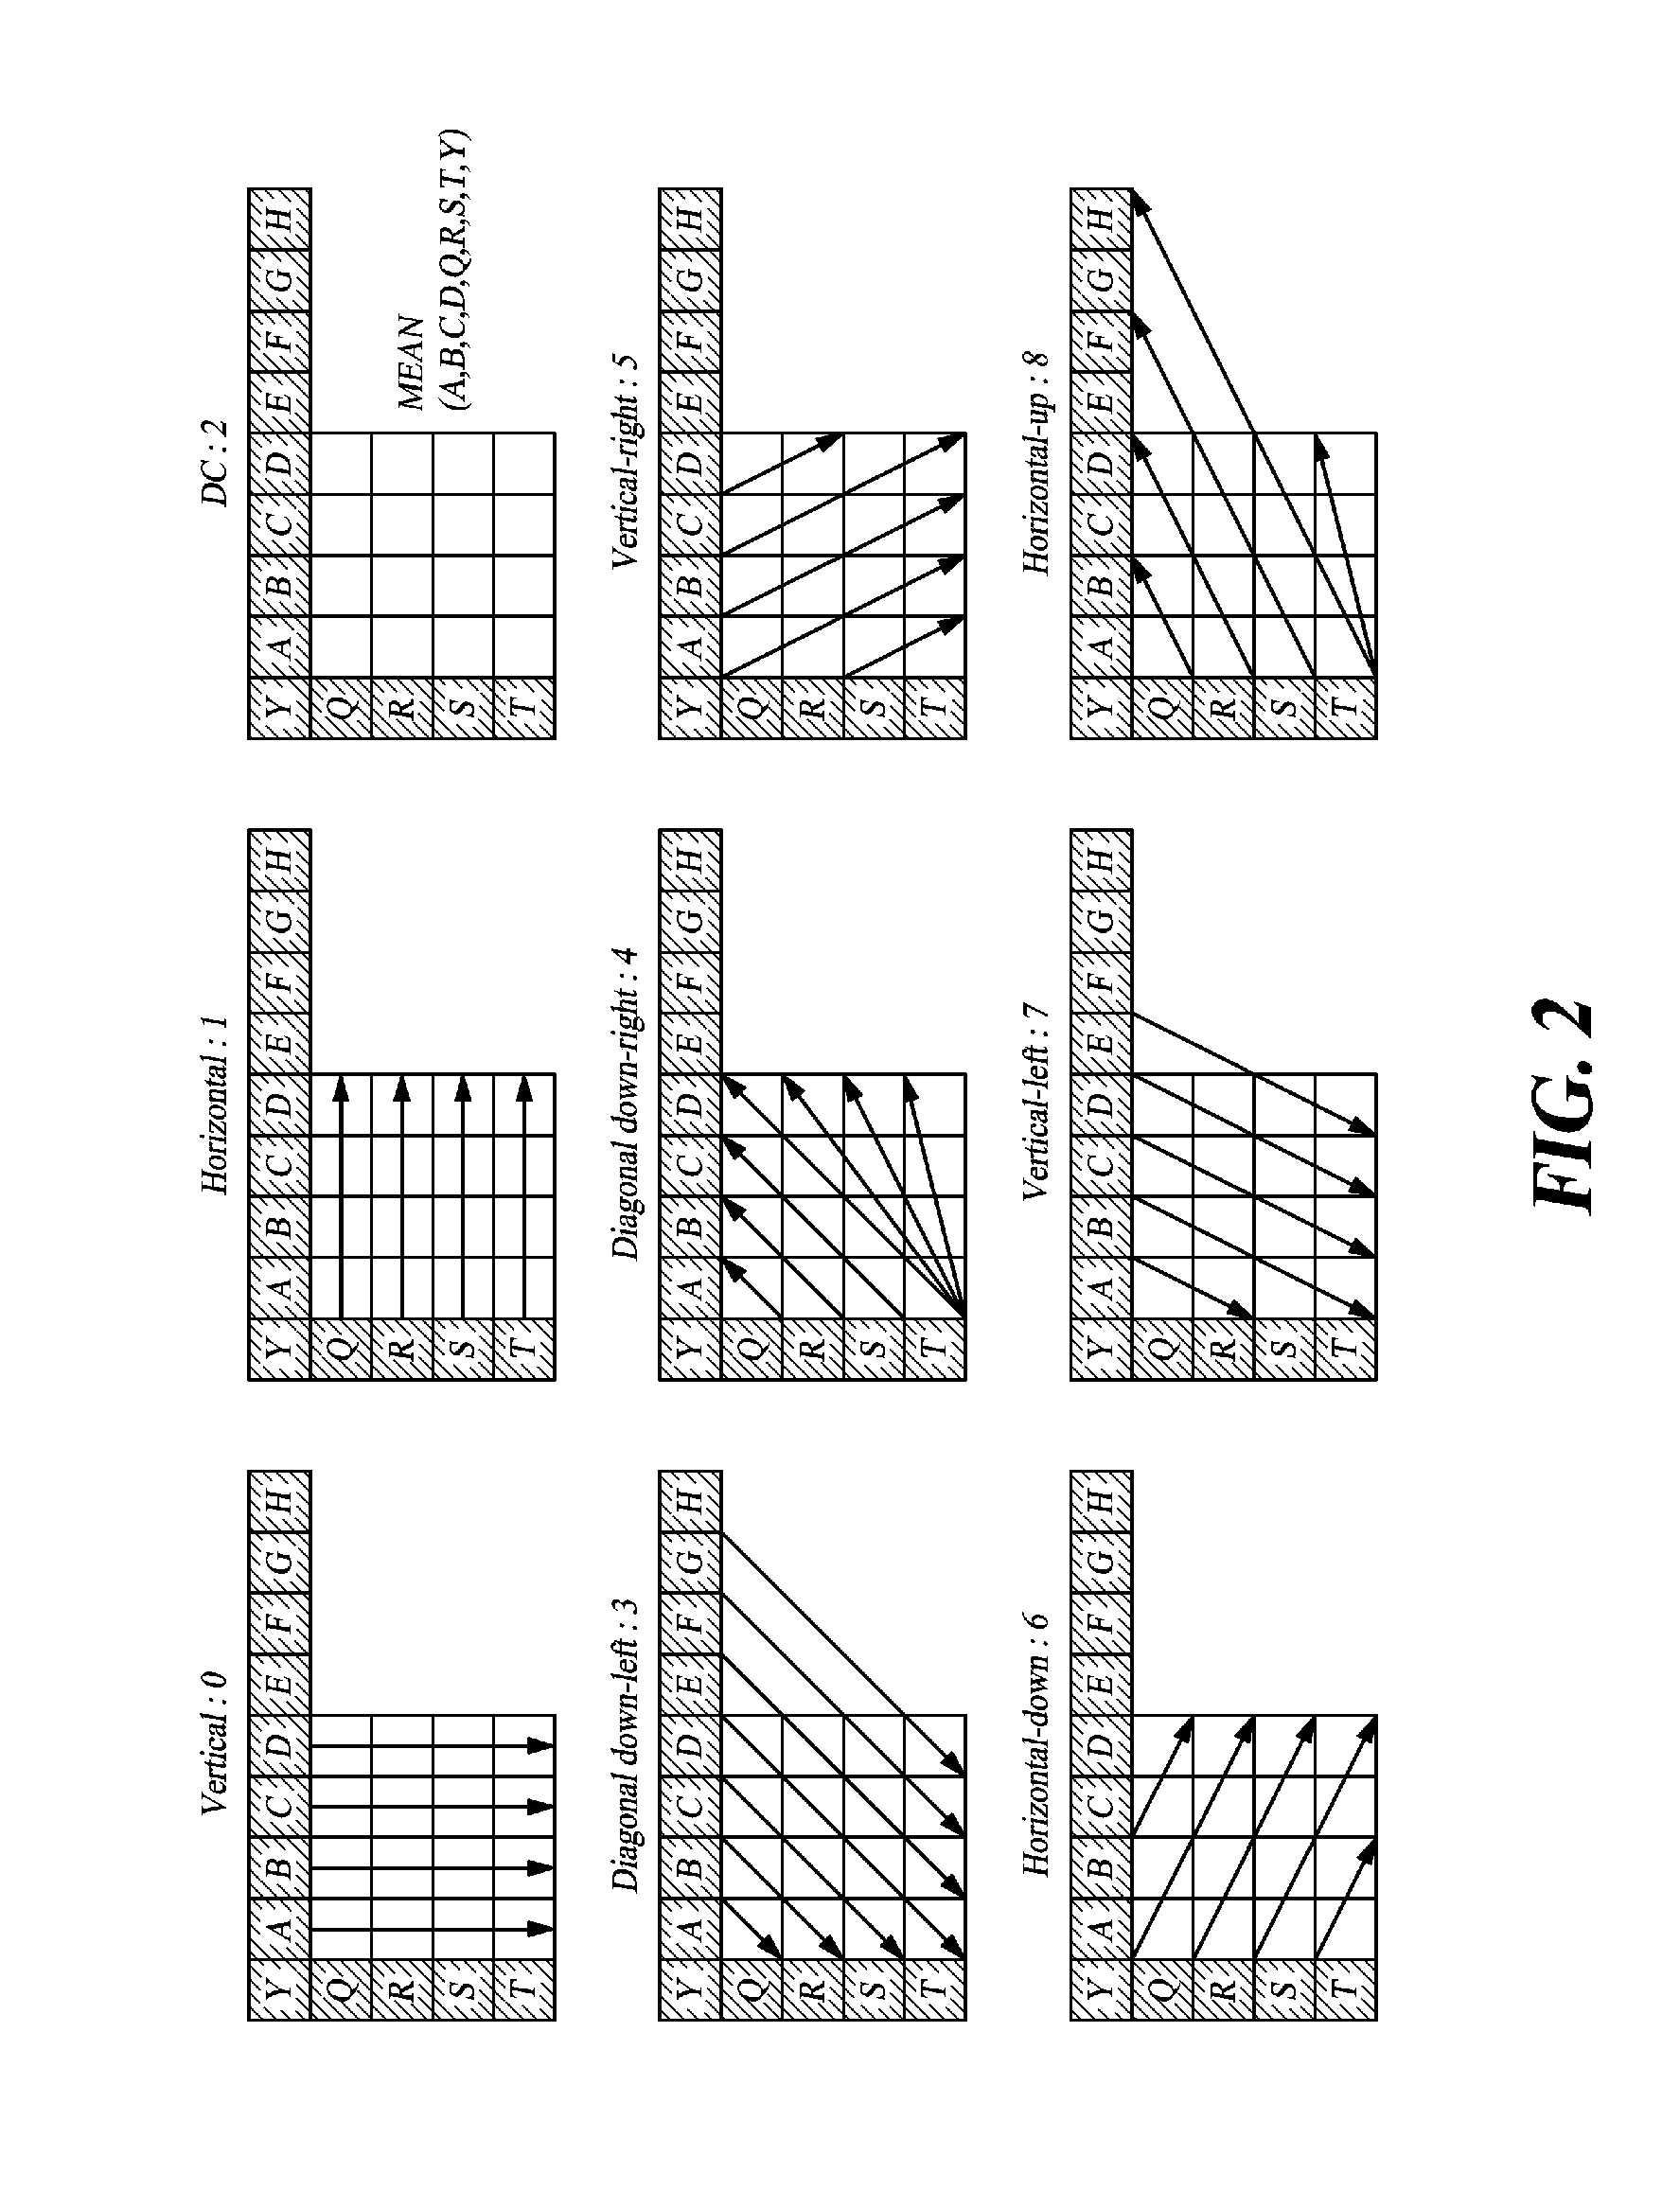 Encoding/decoding method and device for high-resolution moving images